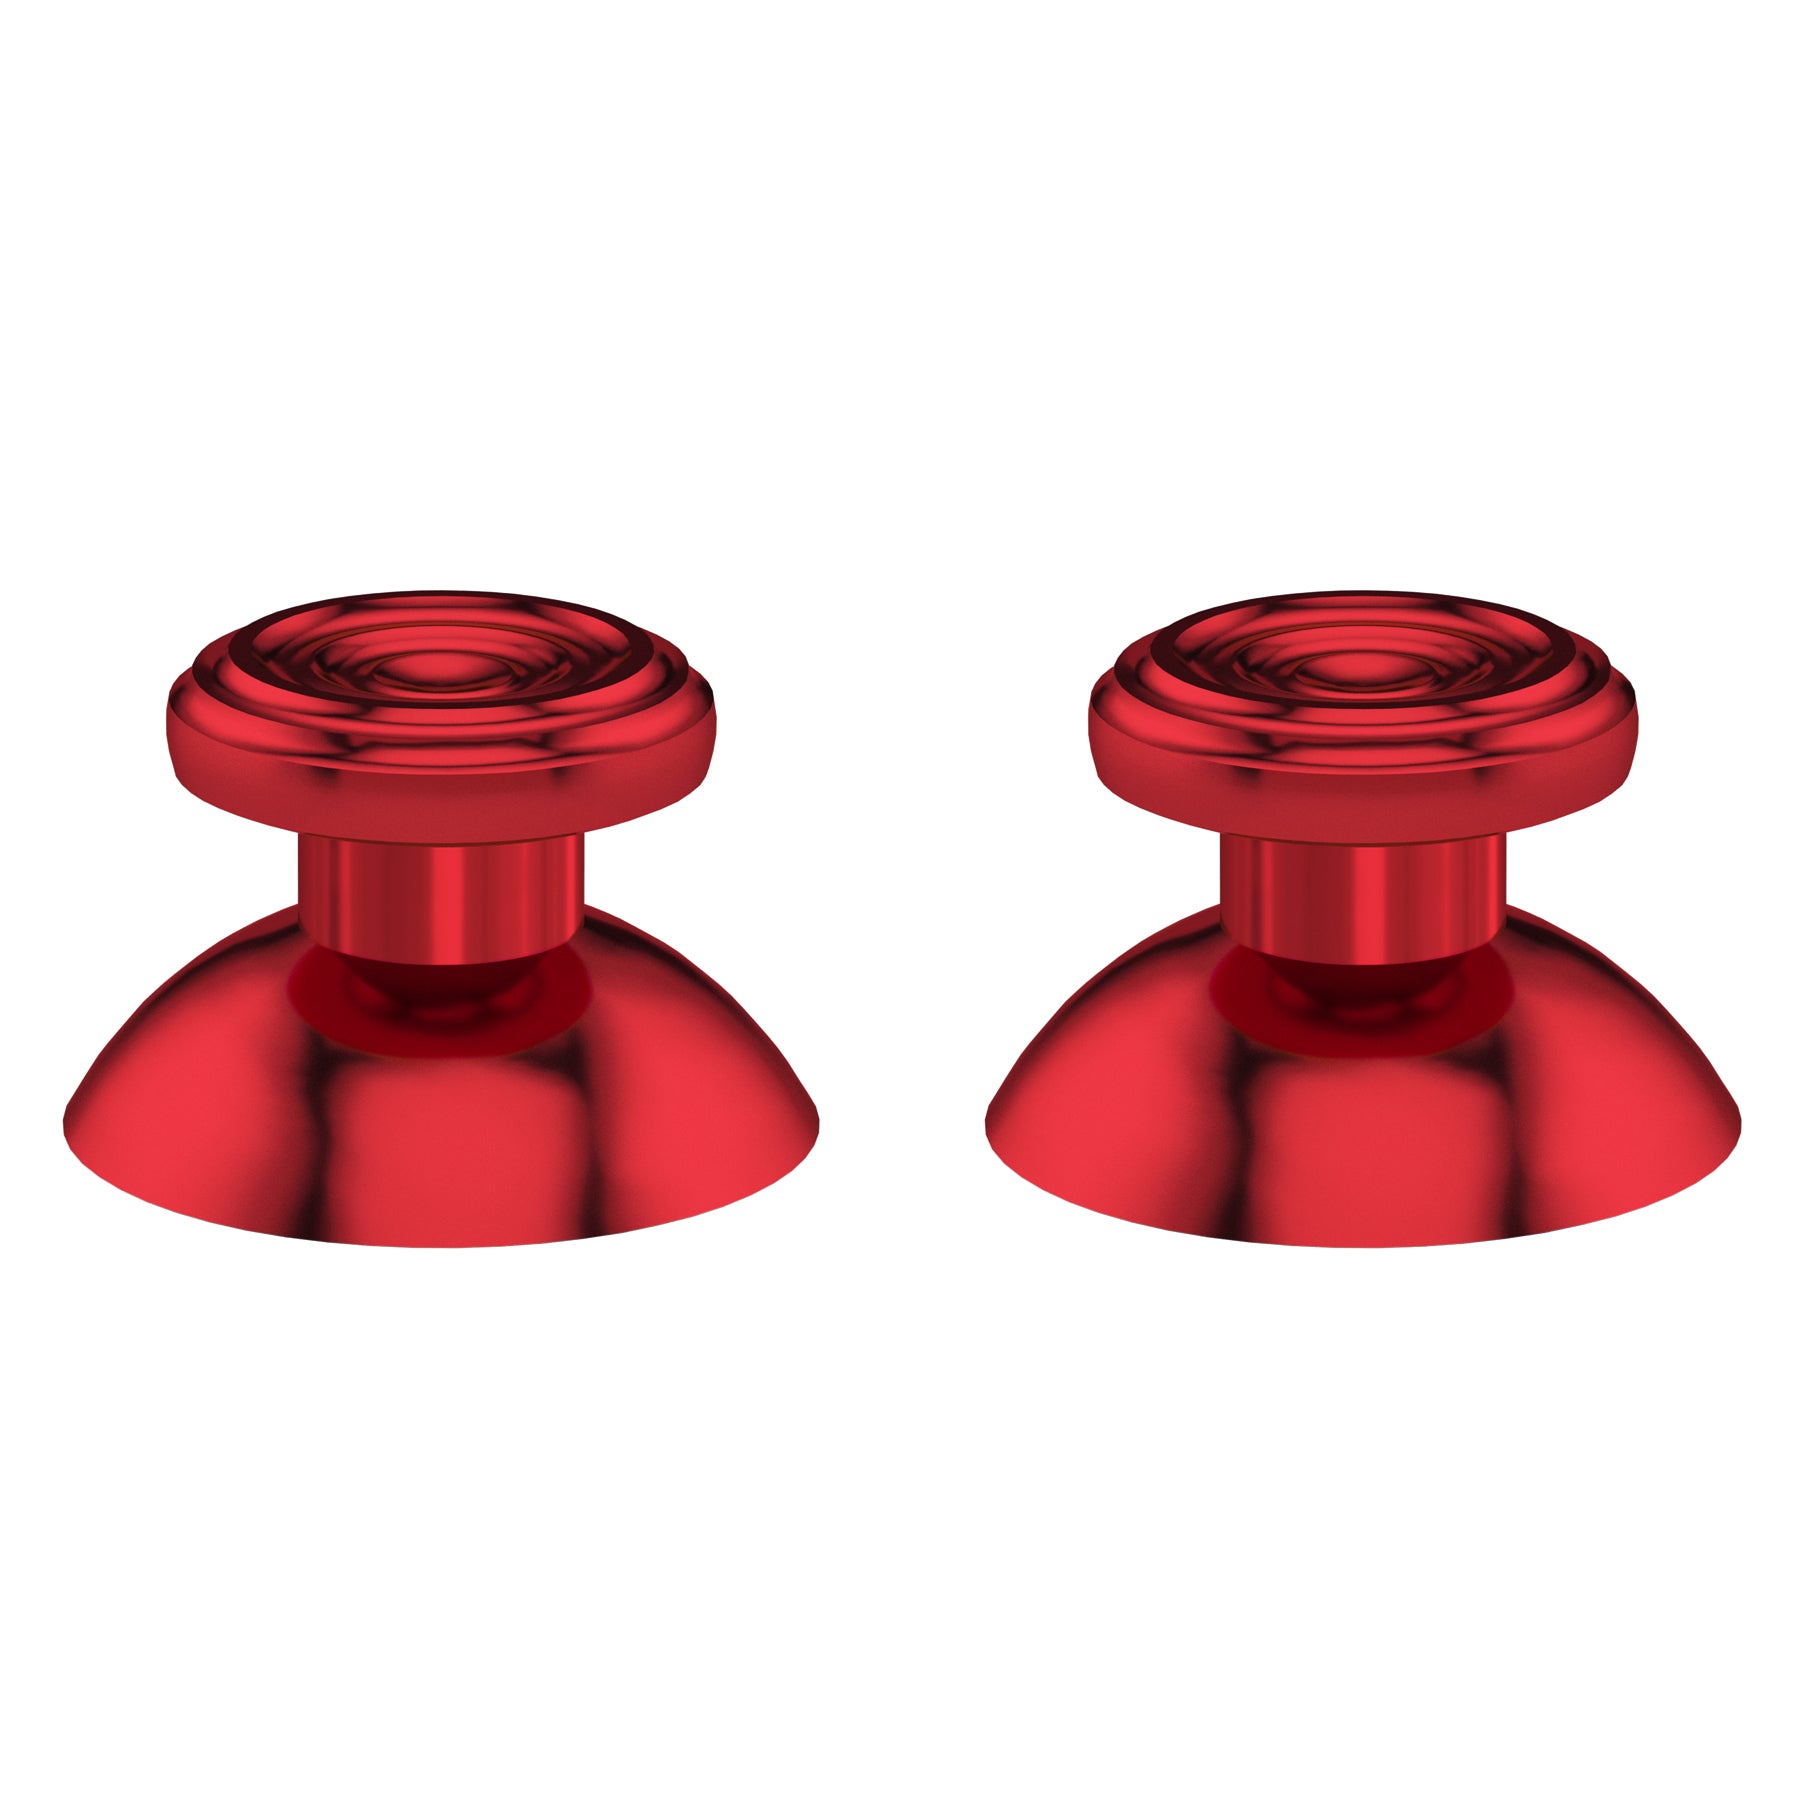 eXtremeRate Retail eXtremeRate Custom Red Metal Thumbsticks for Xbox Series X/S Controller, Concentric Circles Aluminum Alloy Analog Stick for Xbox One S/X, Replacement Joystick for Xbox One Standard Elite Controller - JX3C003